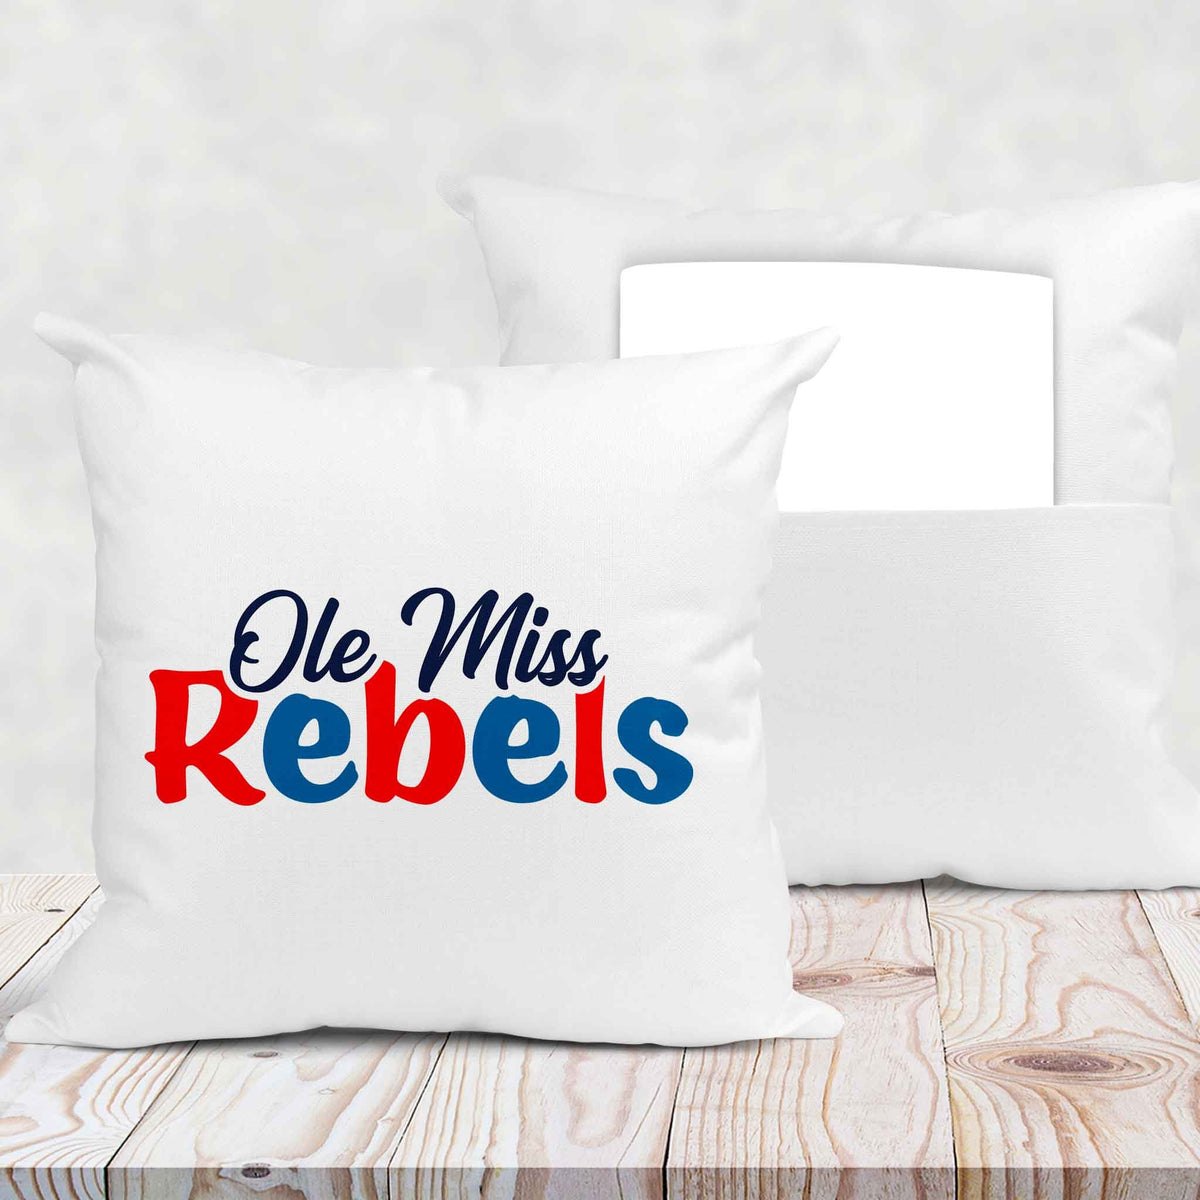 Personalized Throw Pillow | Custom Decorative Pillow | Ole Miss